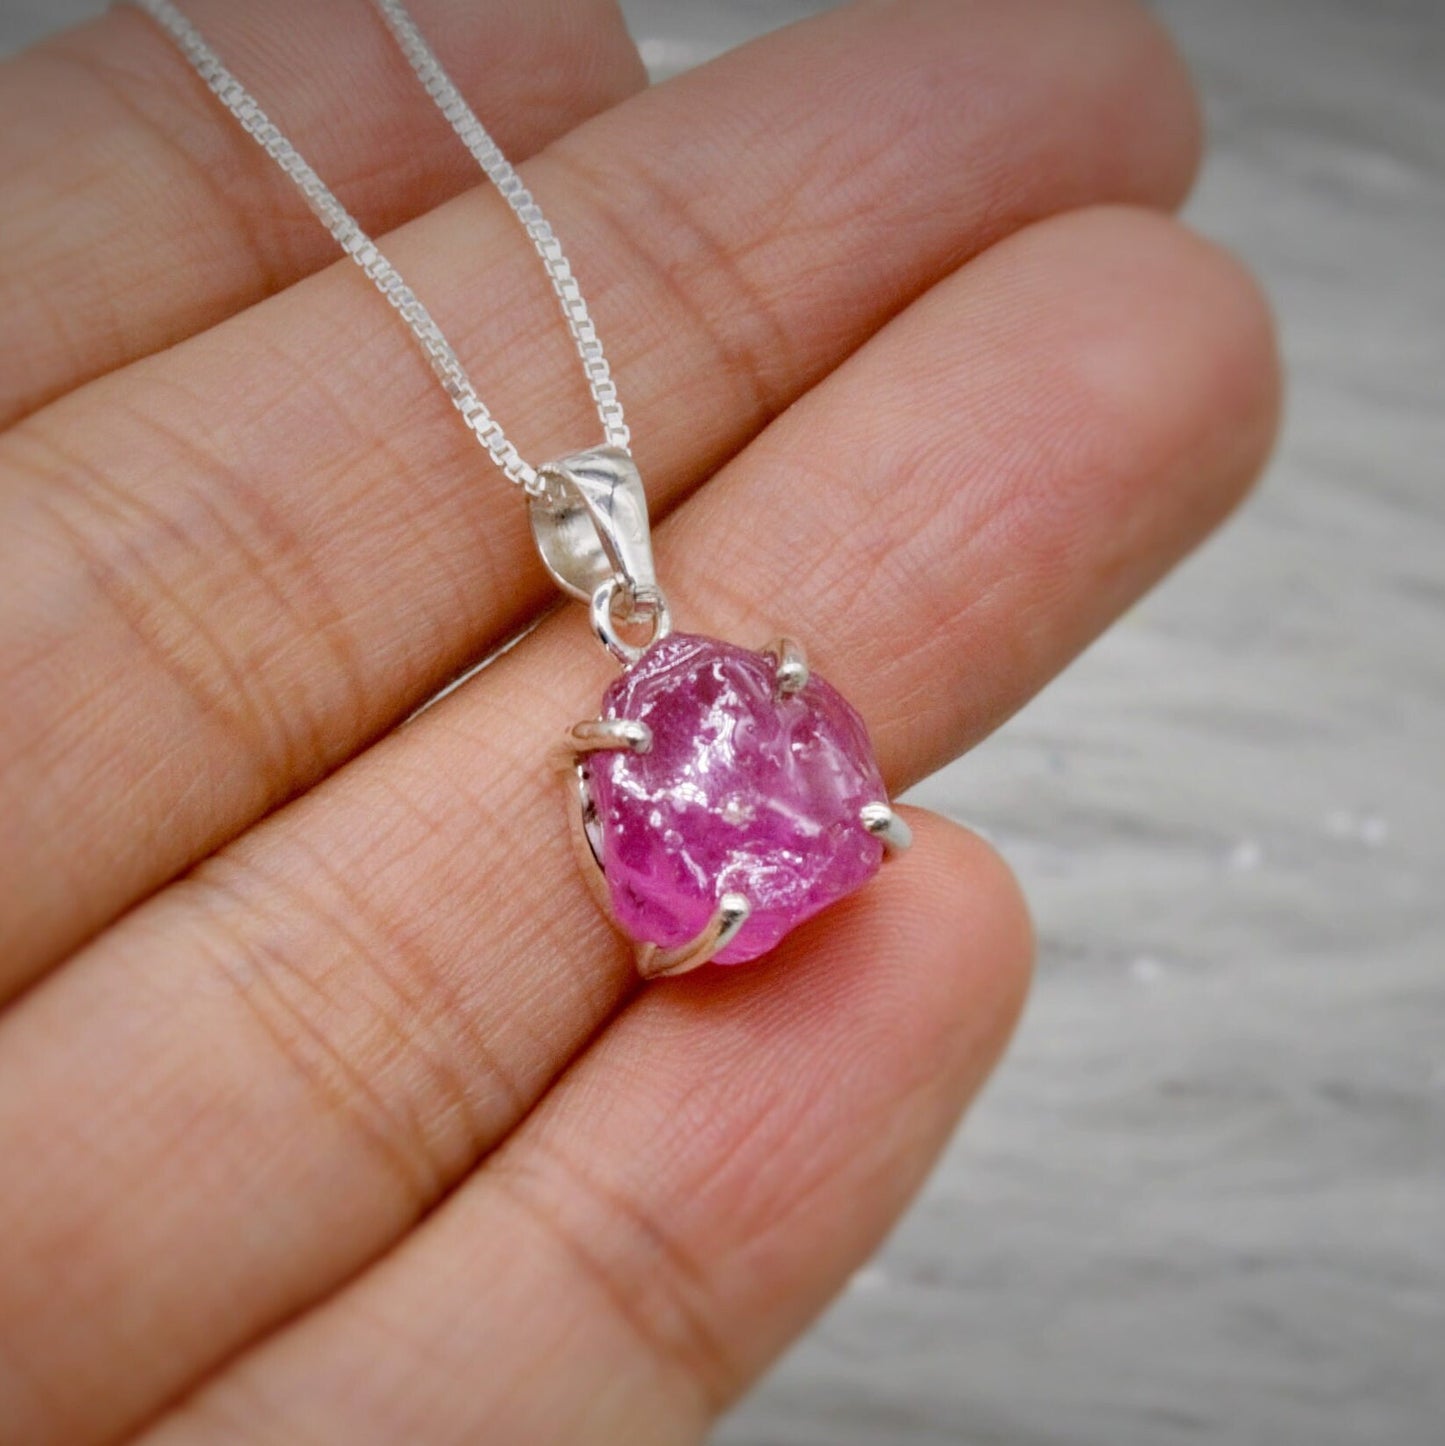 Raw Ruby Chain Pendant Necklace, Sterling Silver, July Birthstone, Dainty Raw Gemstone, Necklaces for Women, Birthday Gift For Her